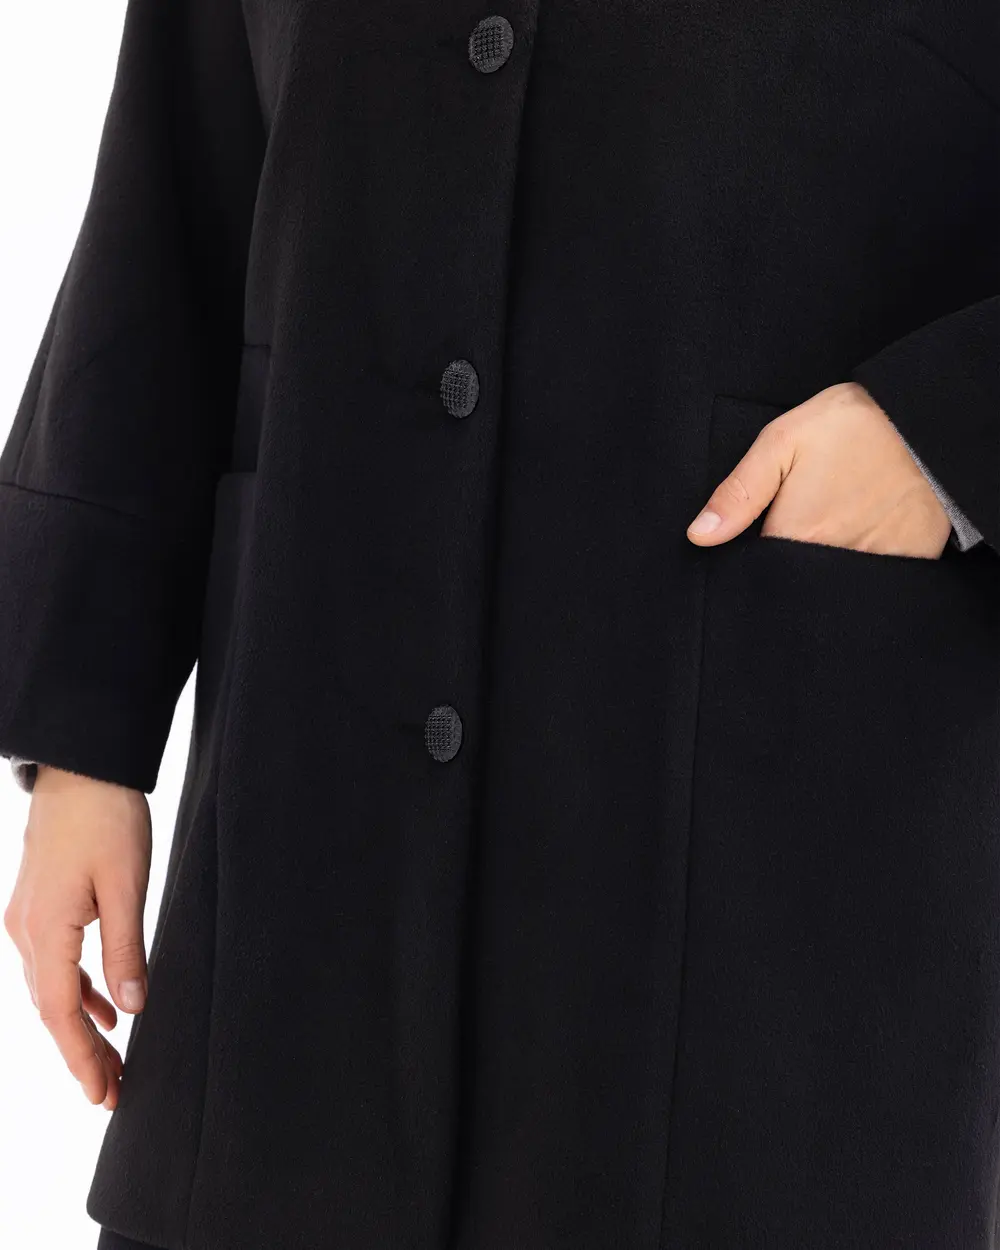 Plus Size Shawl Collar Pocketed Button-Up Coat